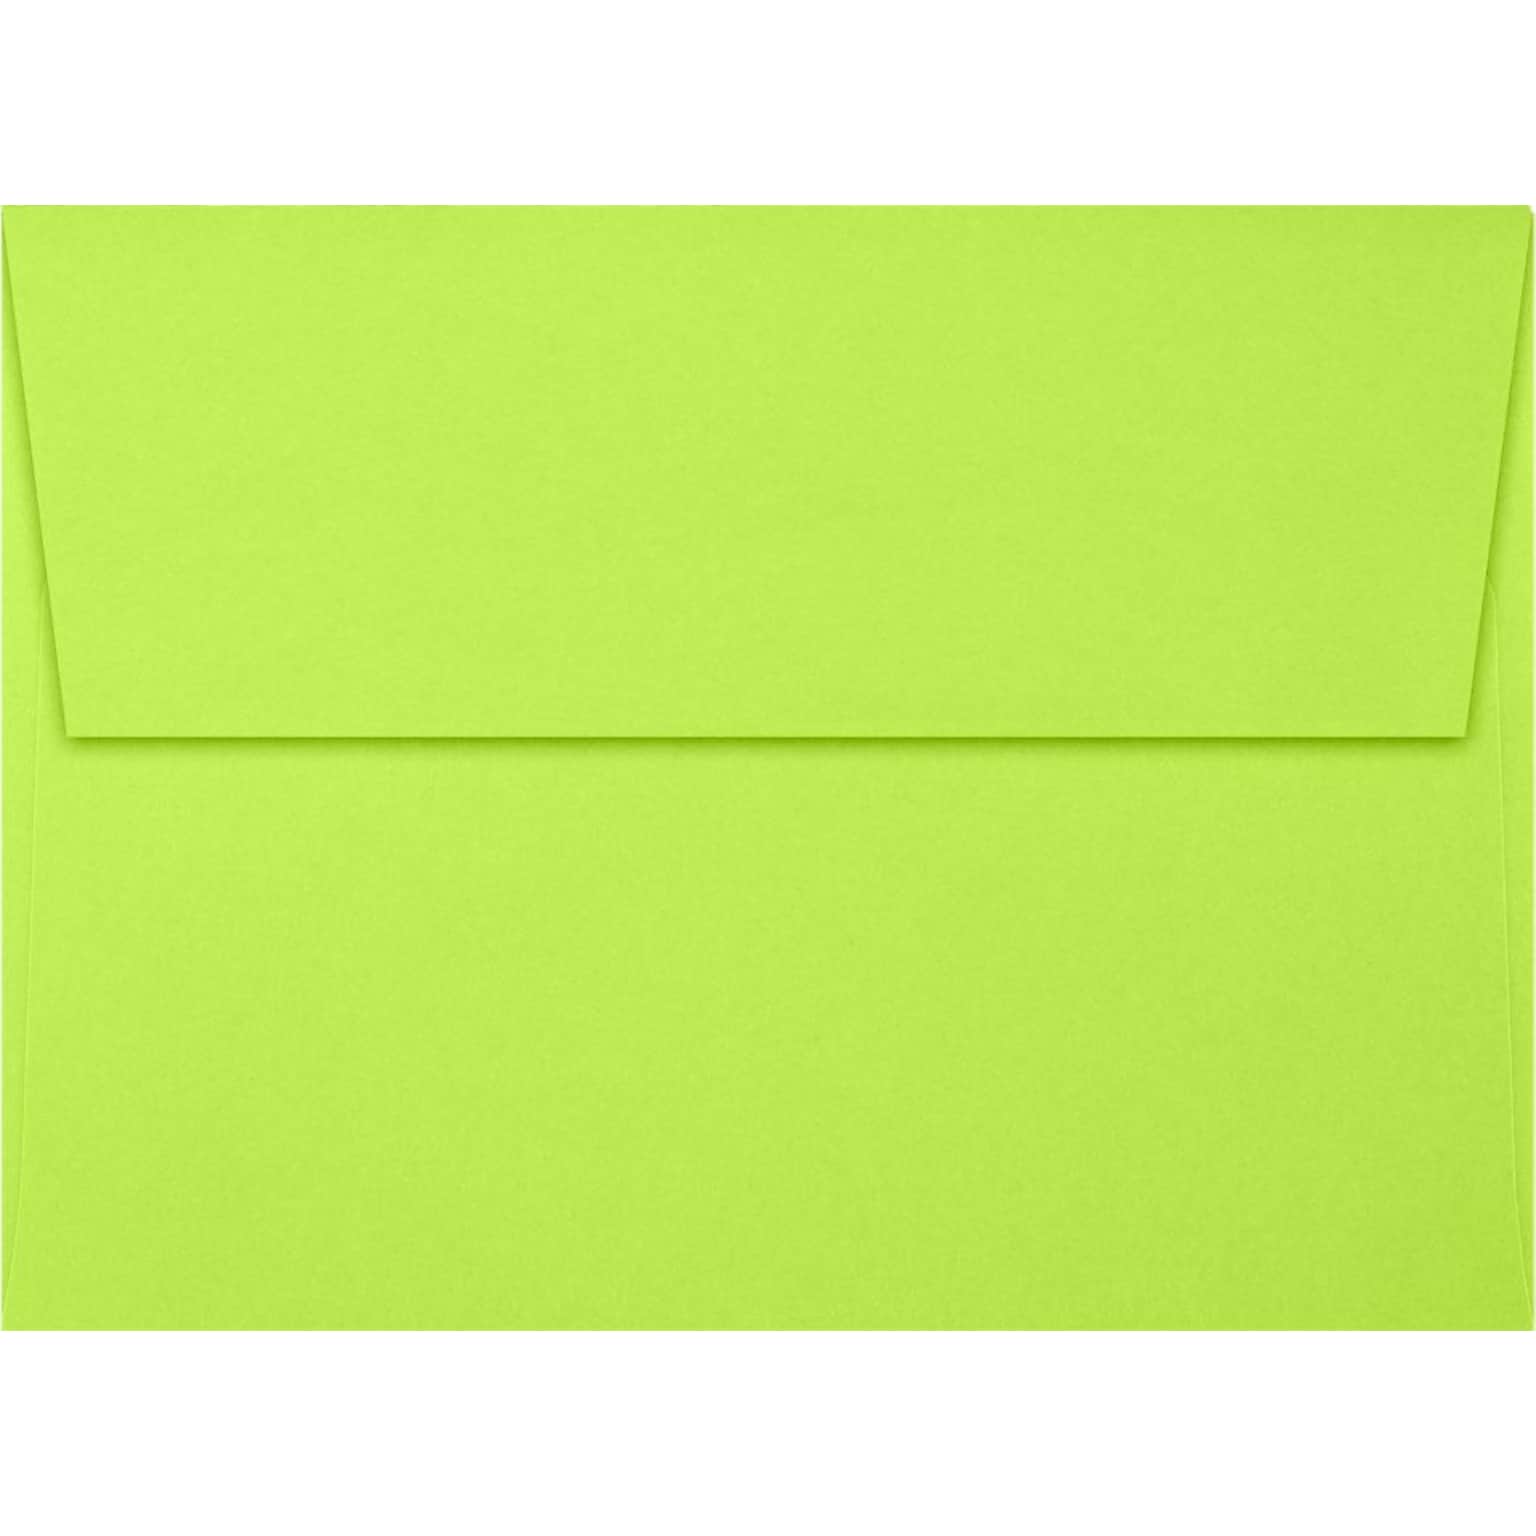 LUX A7 Invitation Envelopes (5 1/4 x 7 1/4) 500/Pack, Electric Green (4880-ULIM-500)